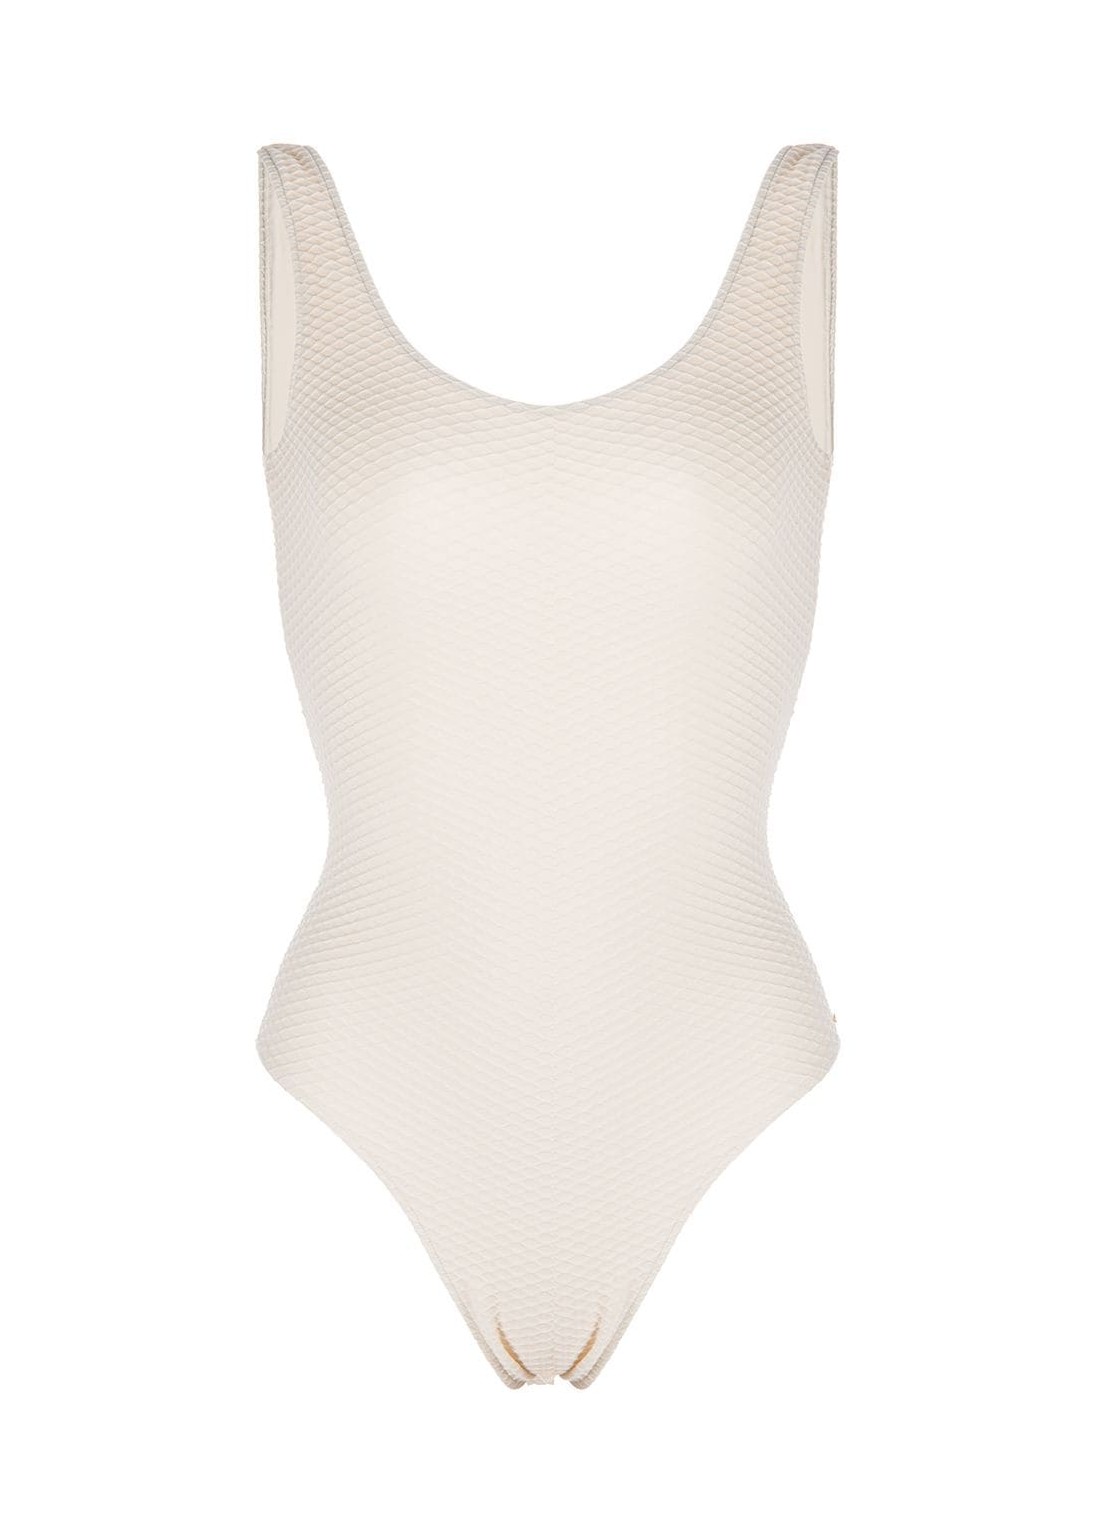 BaNador anine bing swimsuit woman jace one piece a110107127 champagne talla S
 